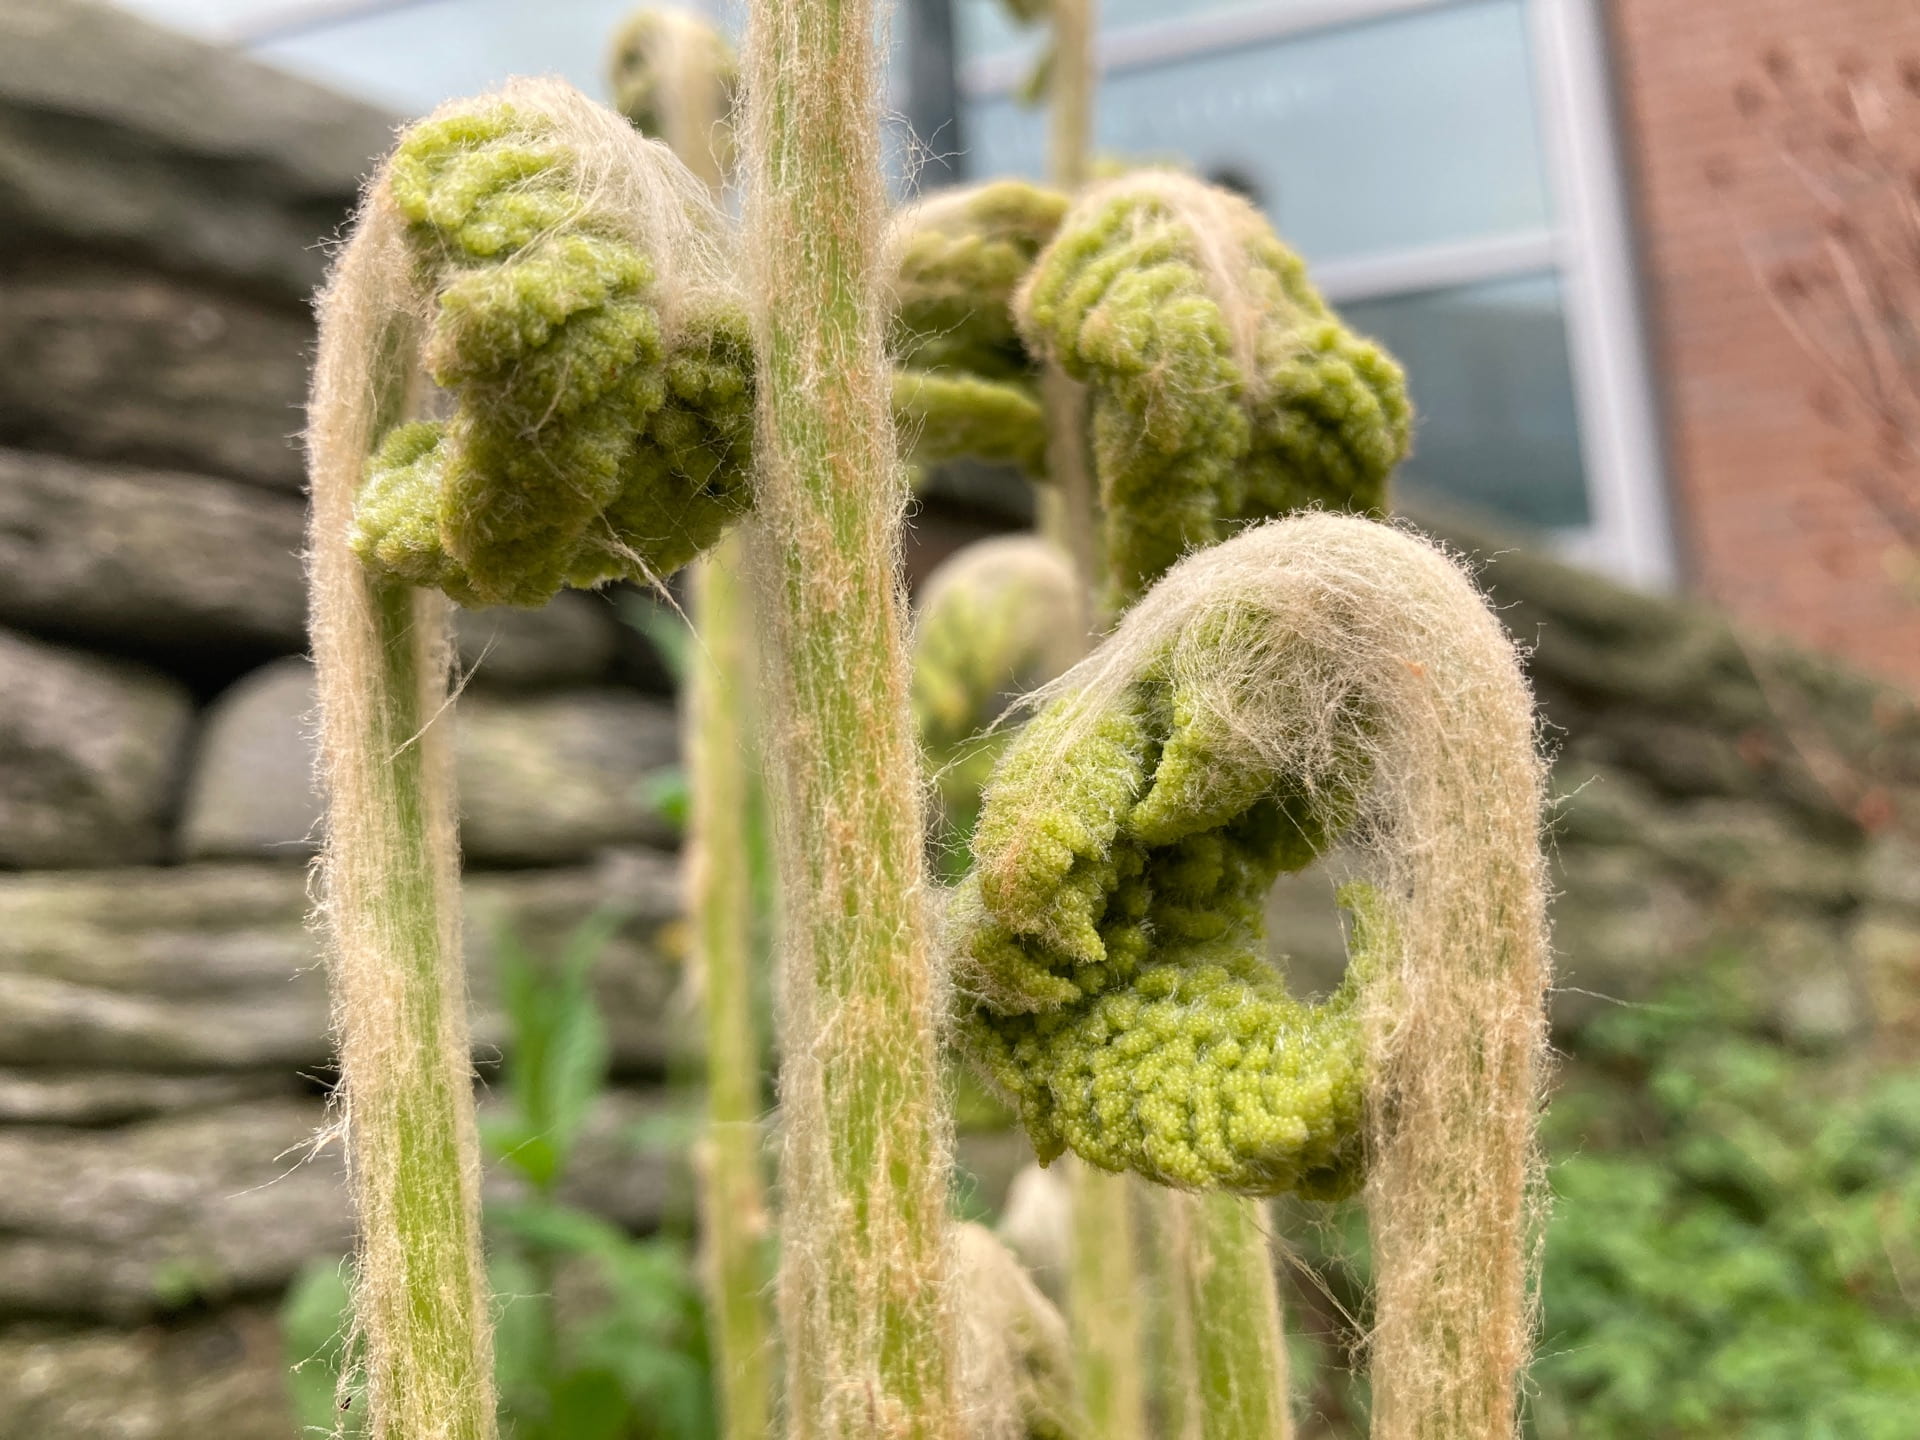 A close up of the fuzzy unfurling fronds of Osmunda ferns.